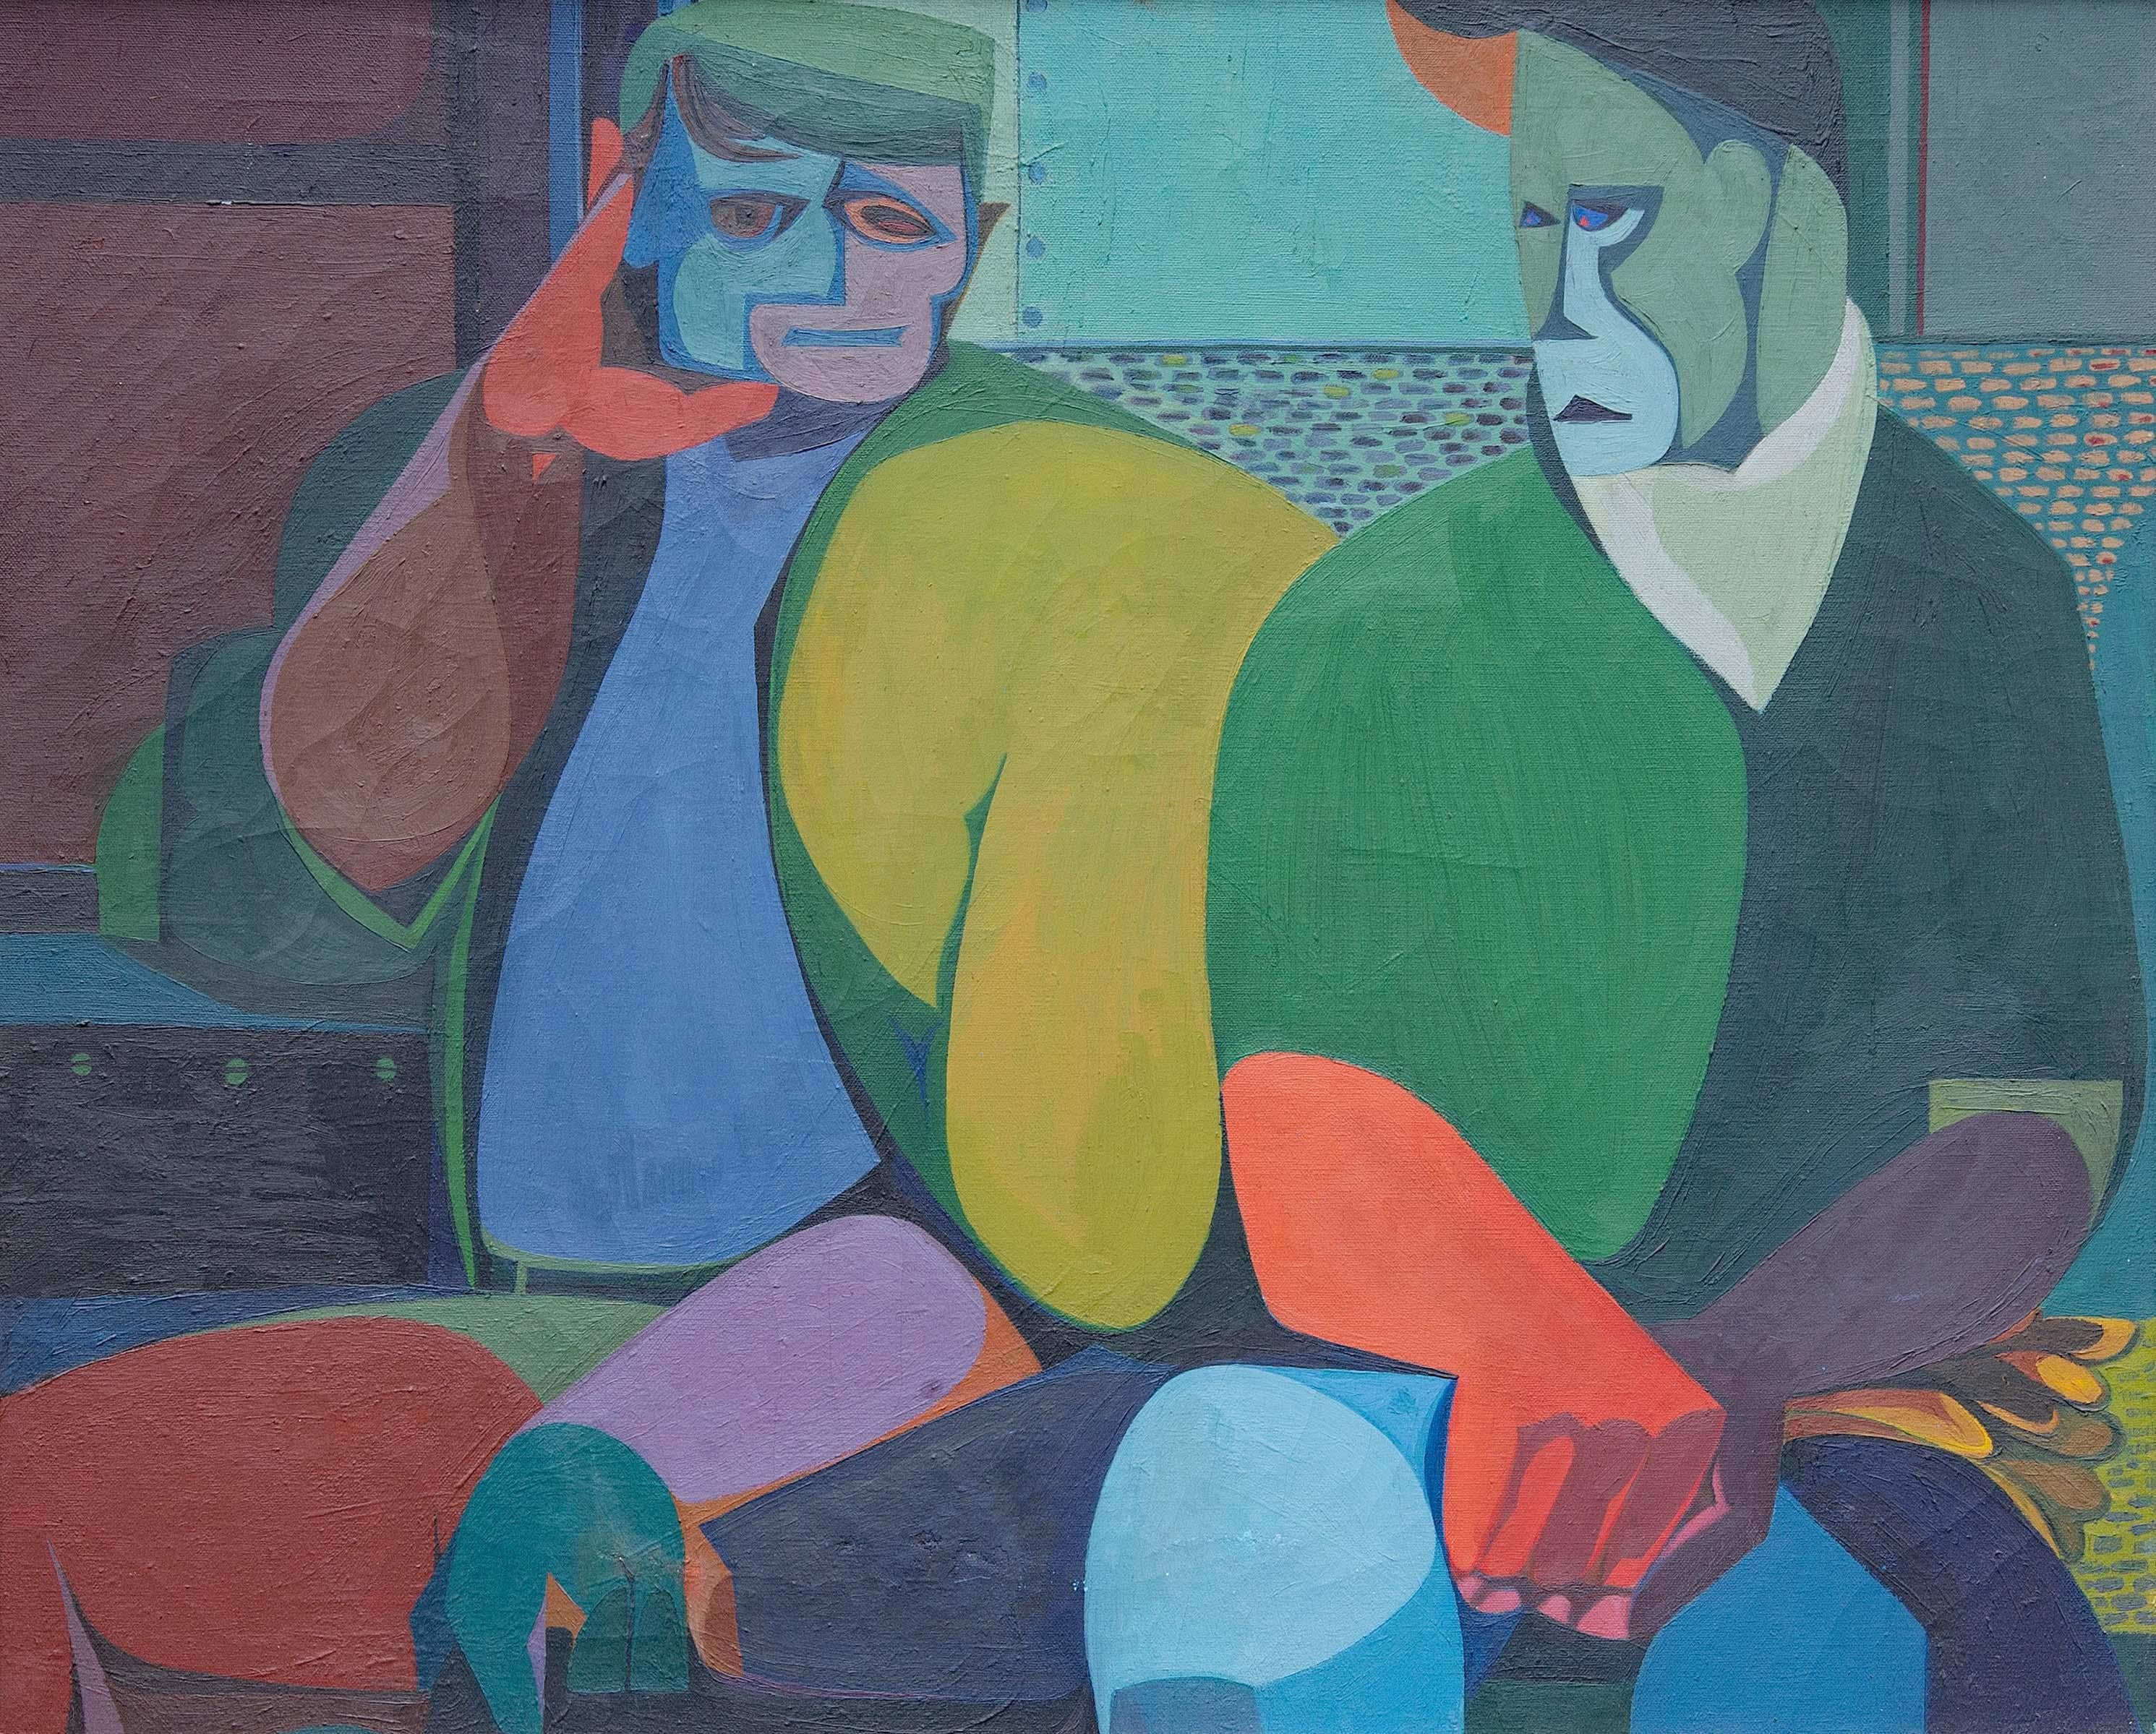 Abstract Painting "The Indestructibles" Industrial Workers Dated 1949